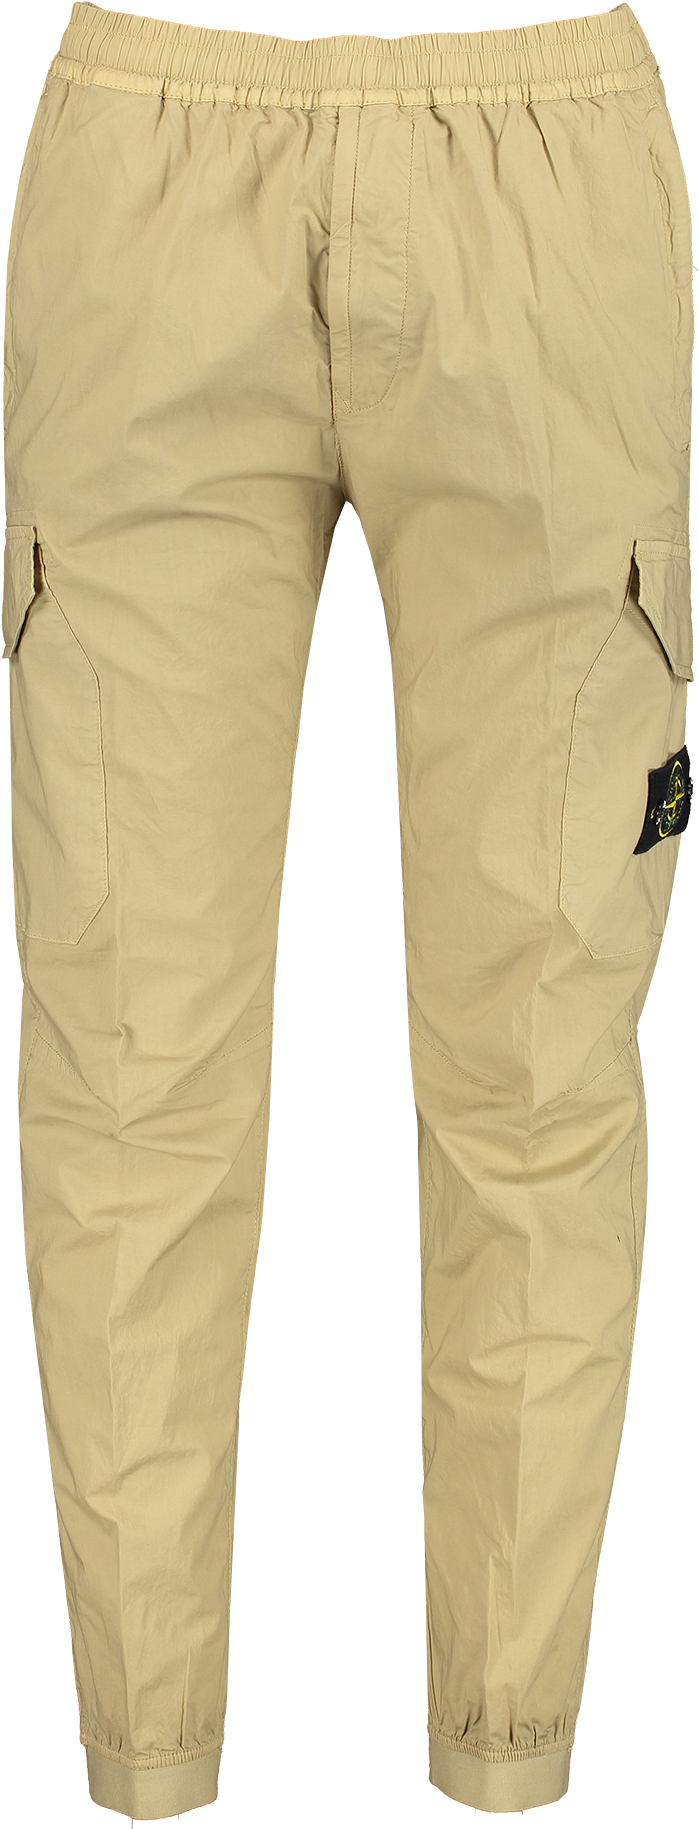 Beige Cargo Pants Isolated PNG image